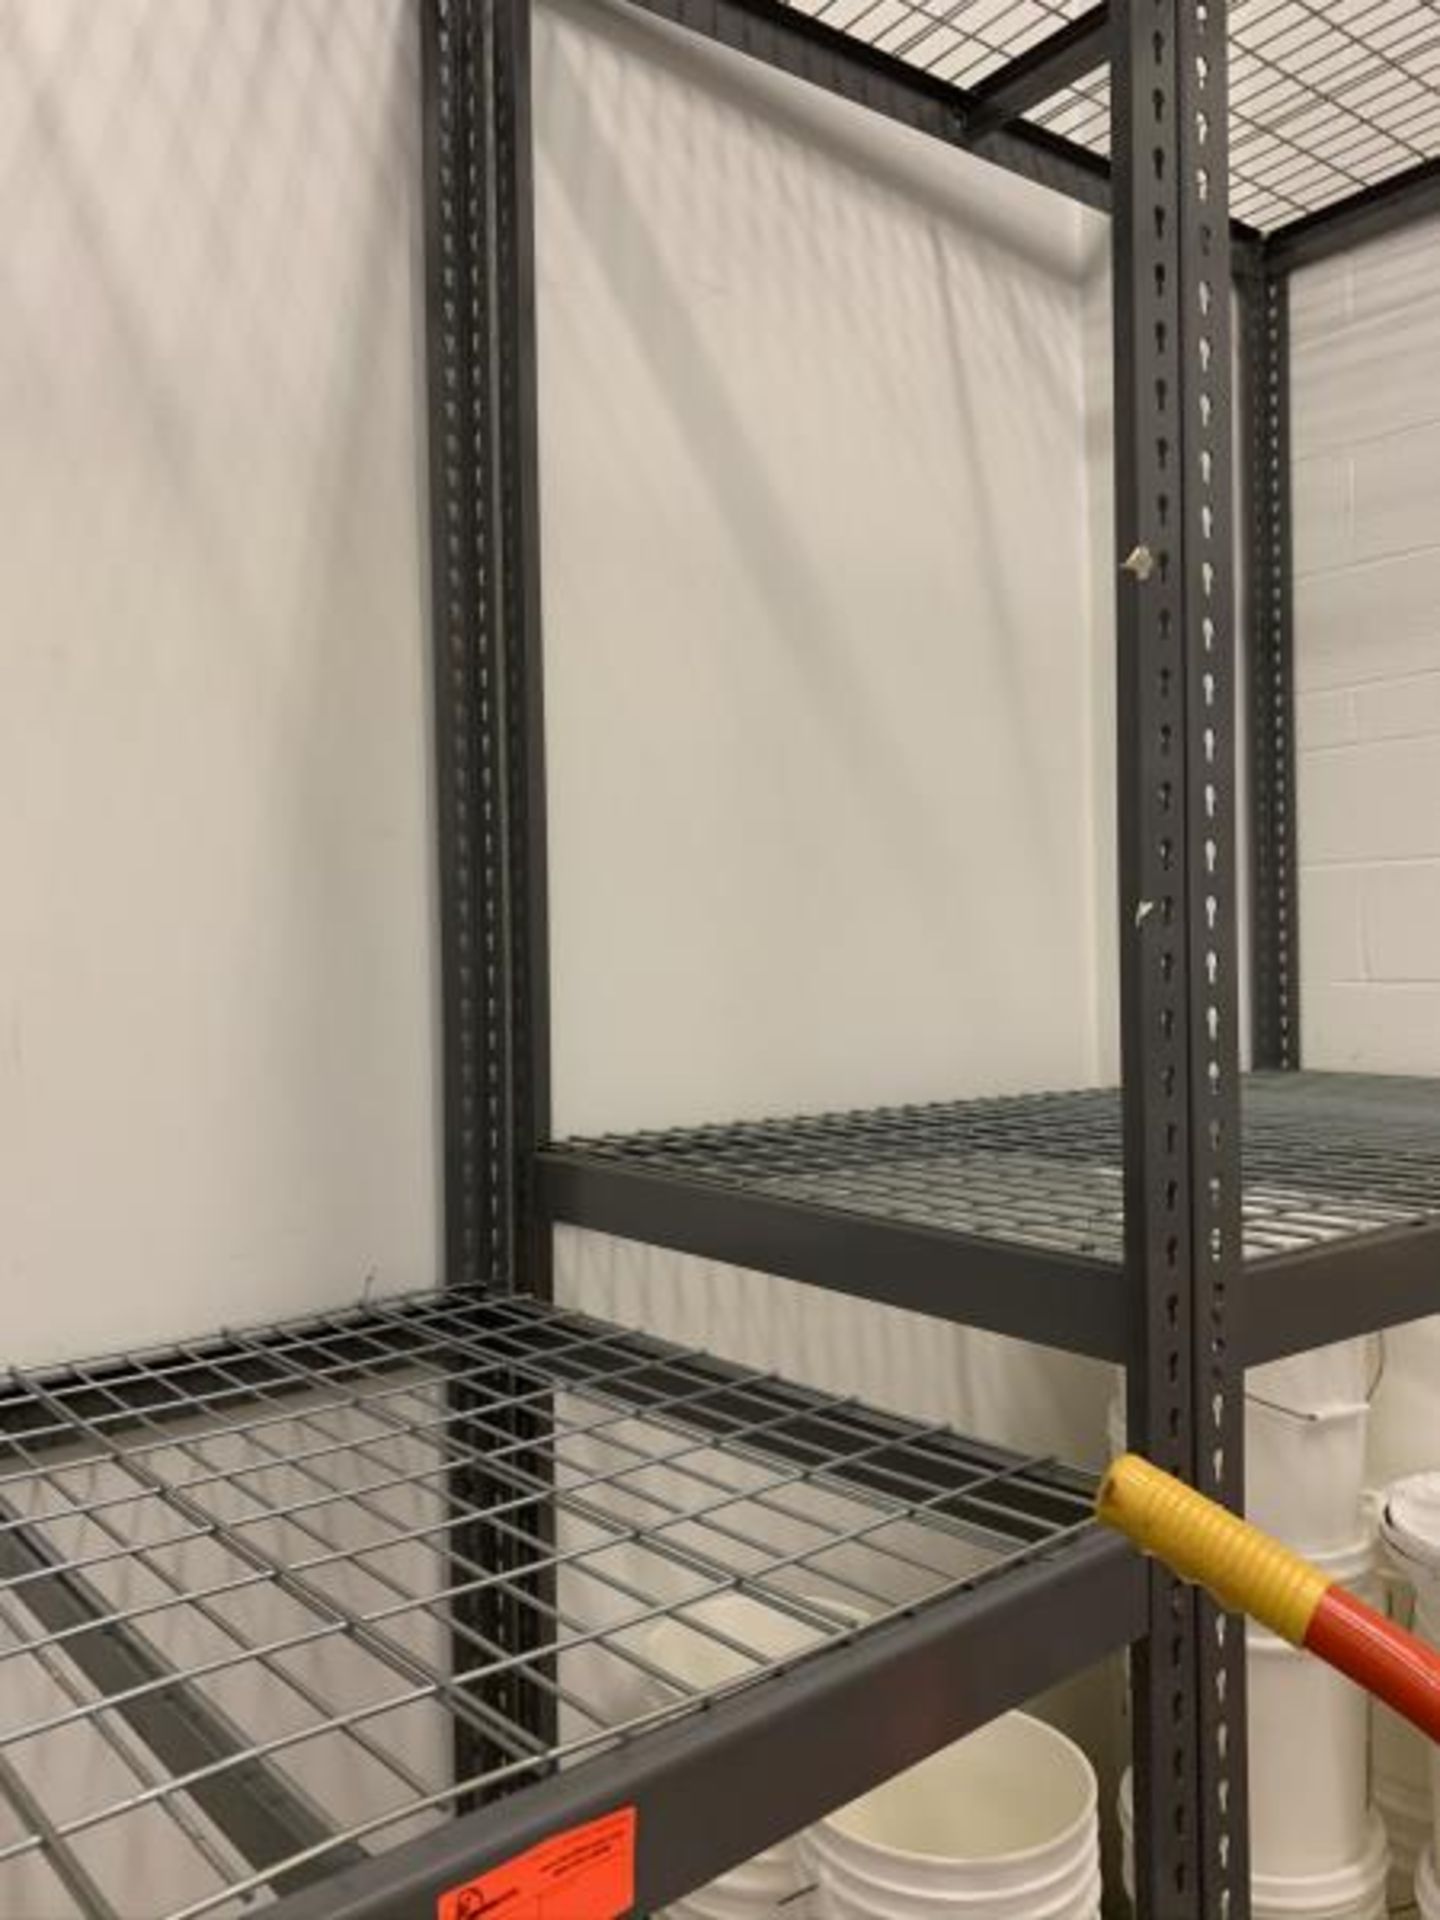 2 Sections Grey Metal Racking w/ Metal Wire Grid Shelves - Image 3 of 4